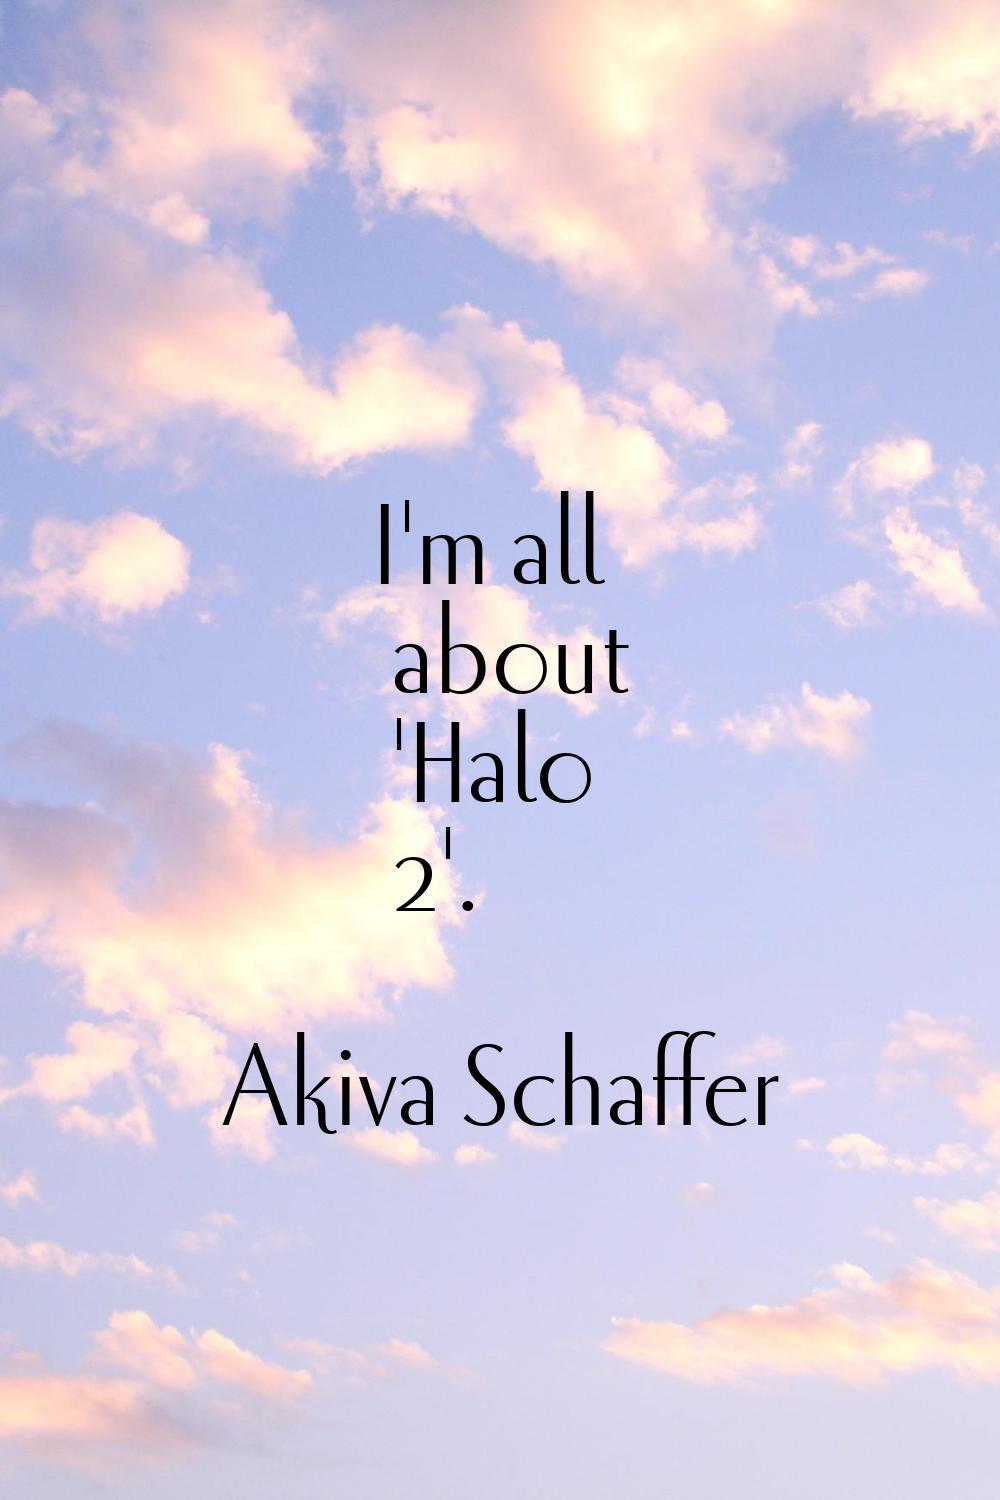 I'm all about 'Halo 2'.